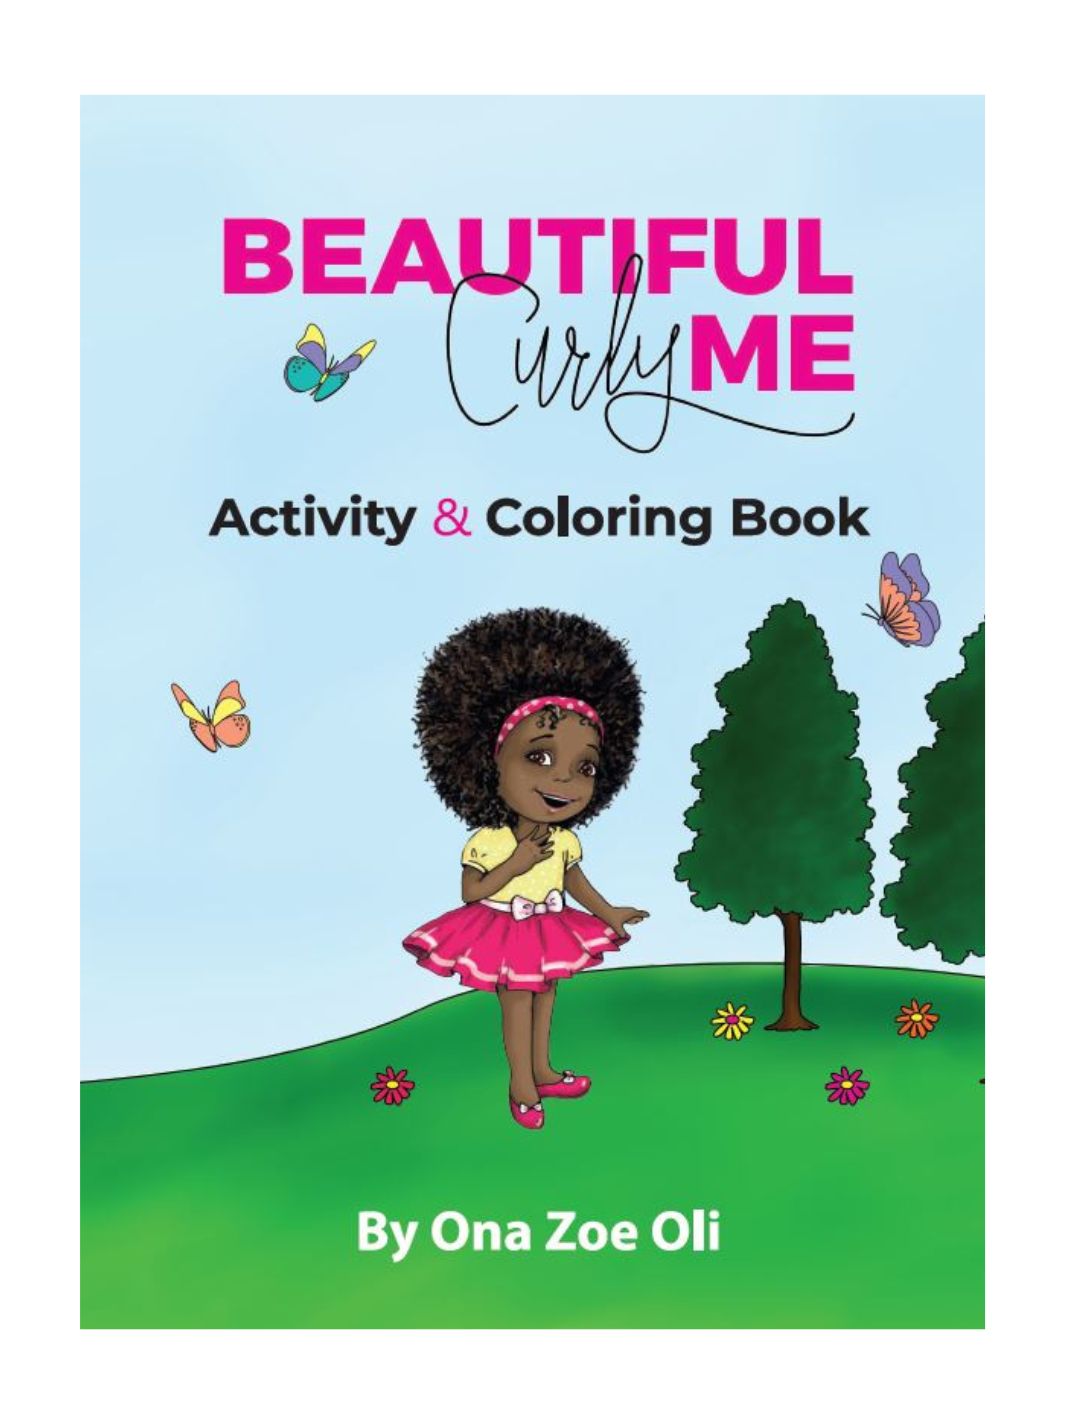 Beautiful Curly Me Interactive Activity & Coloring Book Sets